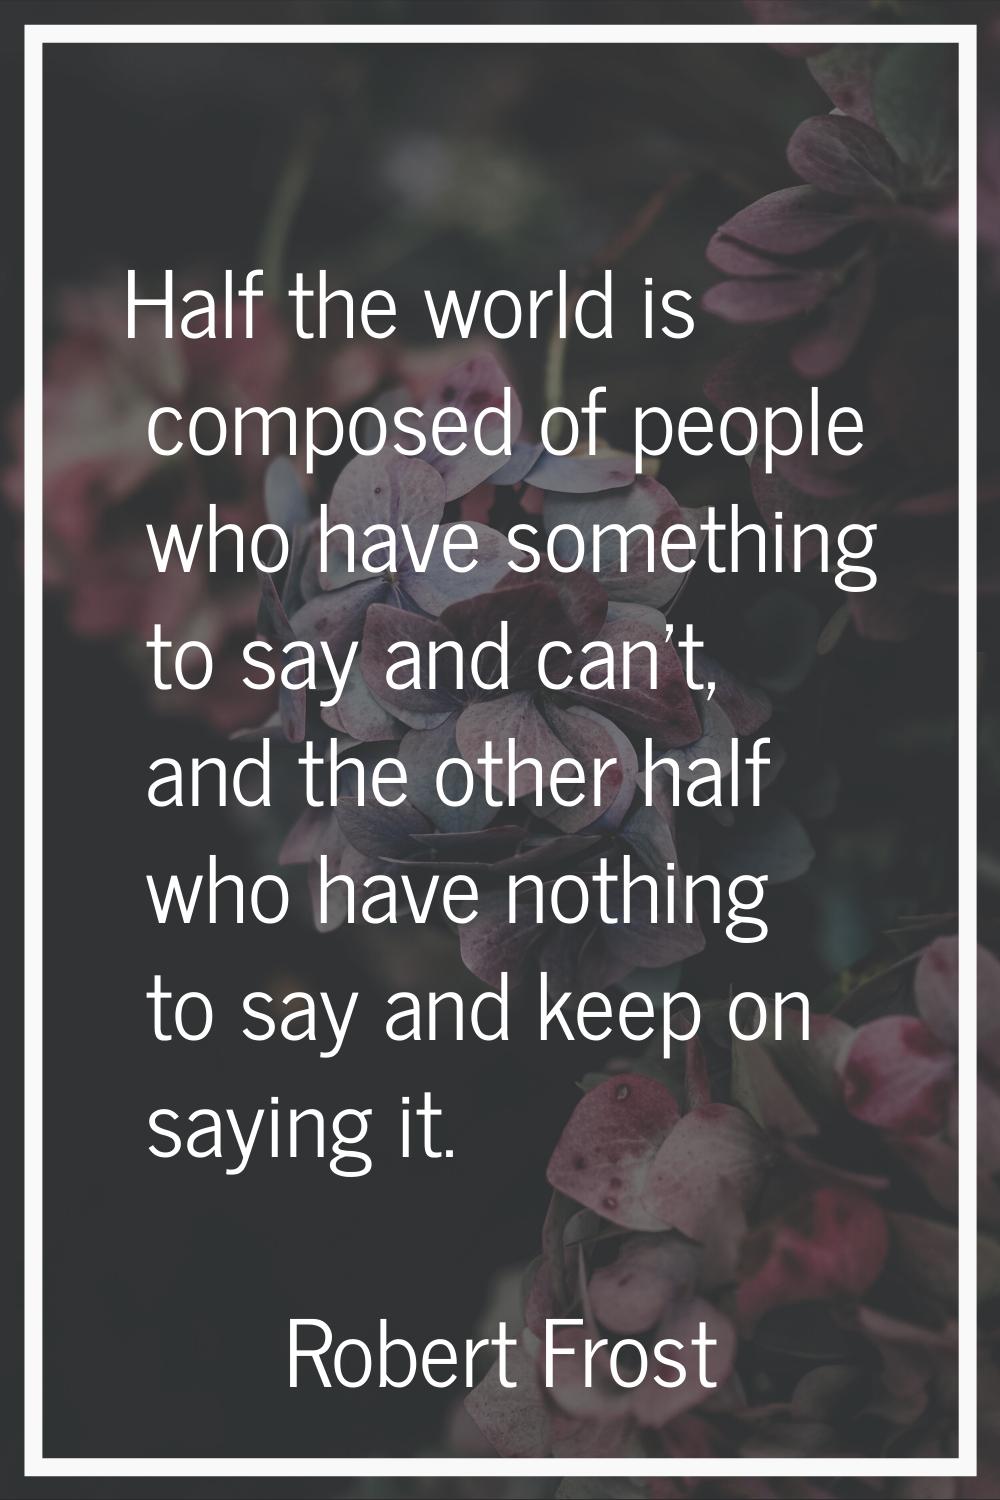 Half the world is composed of people who have something to say and can't, and the other half who ha